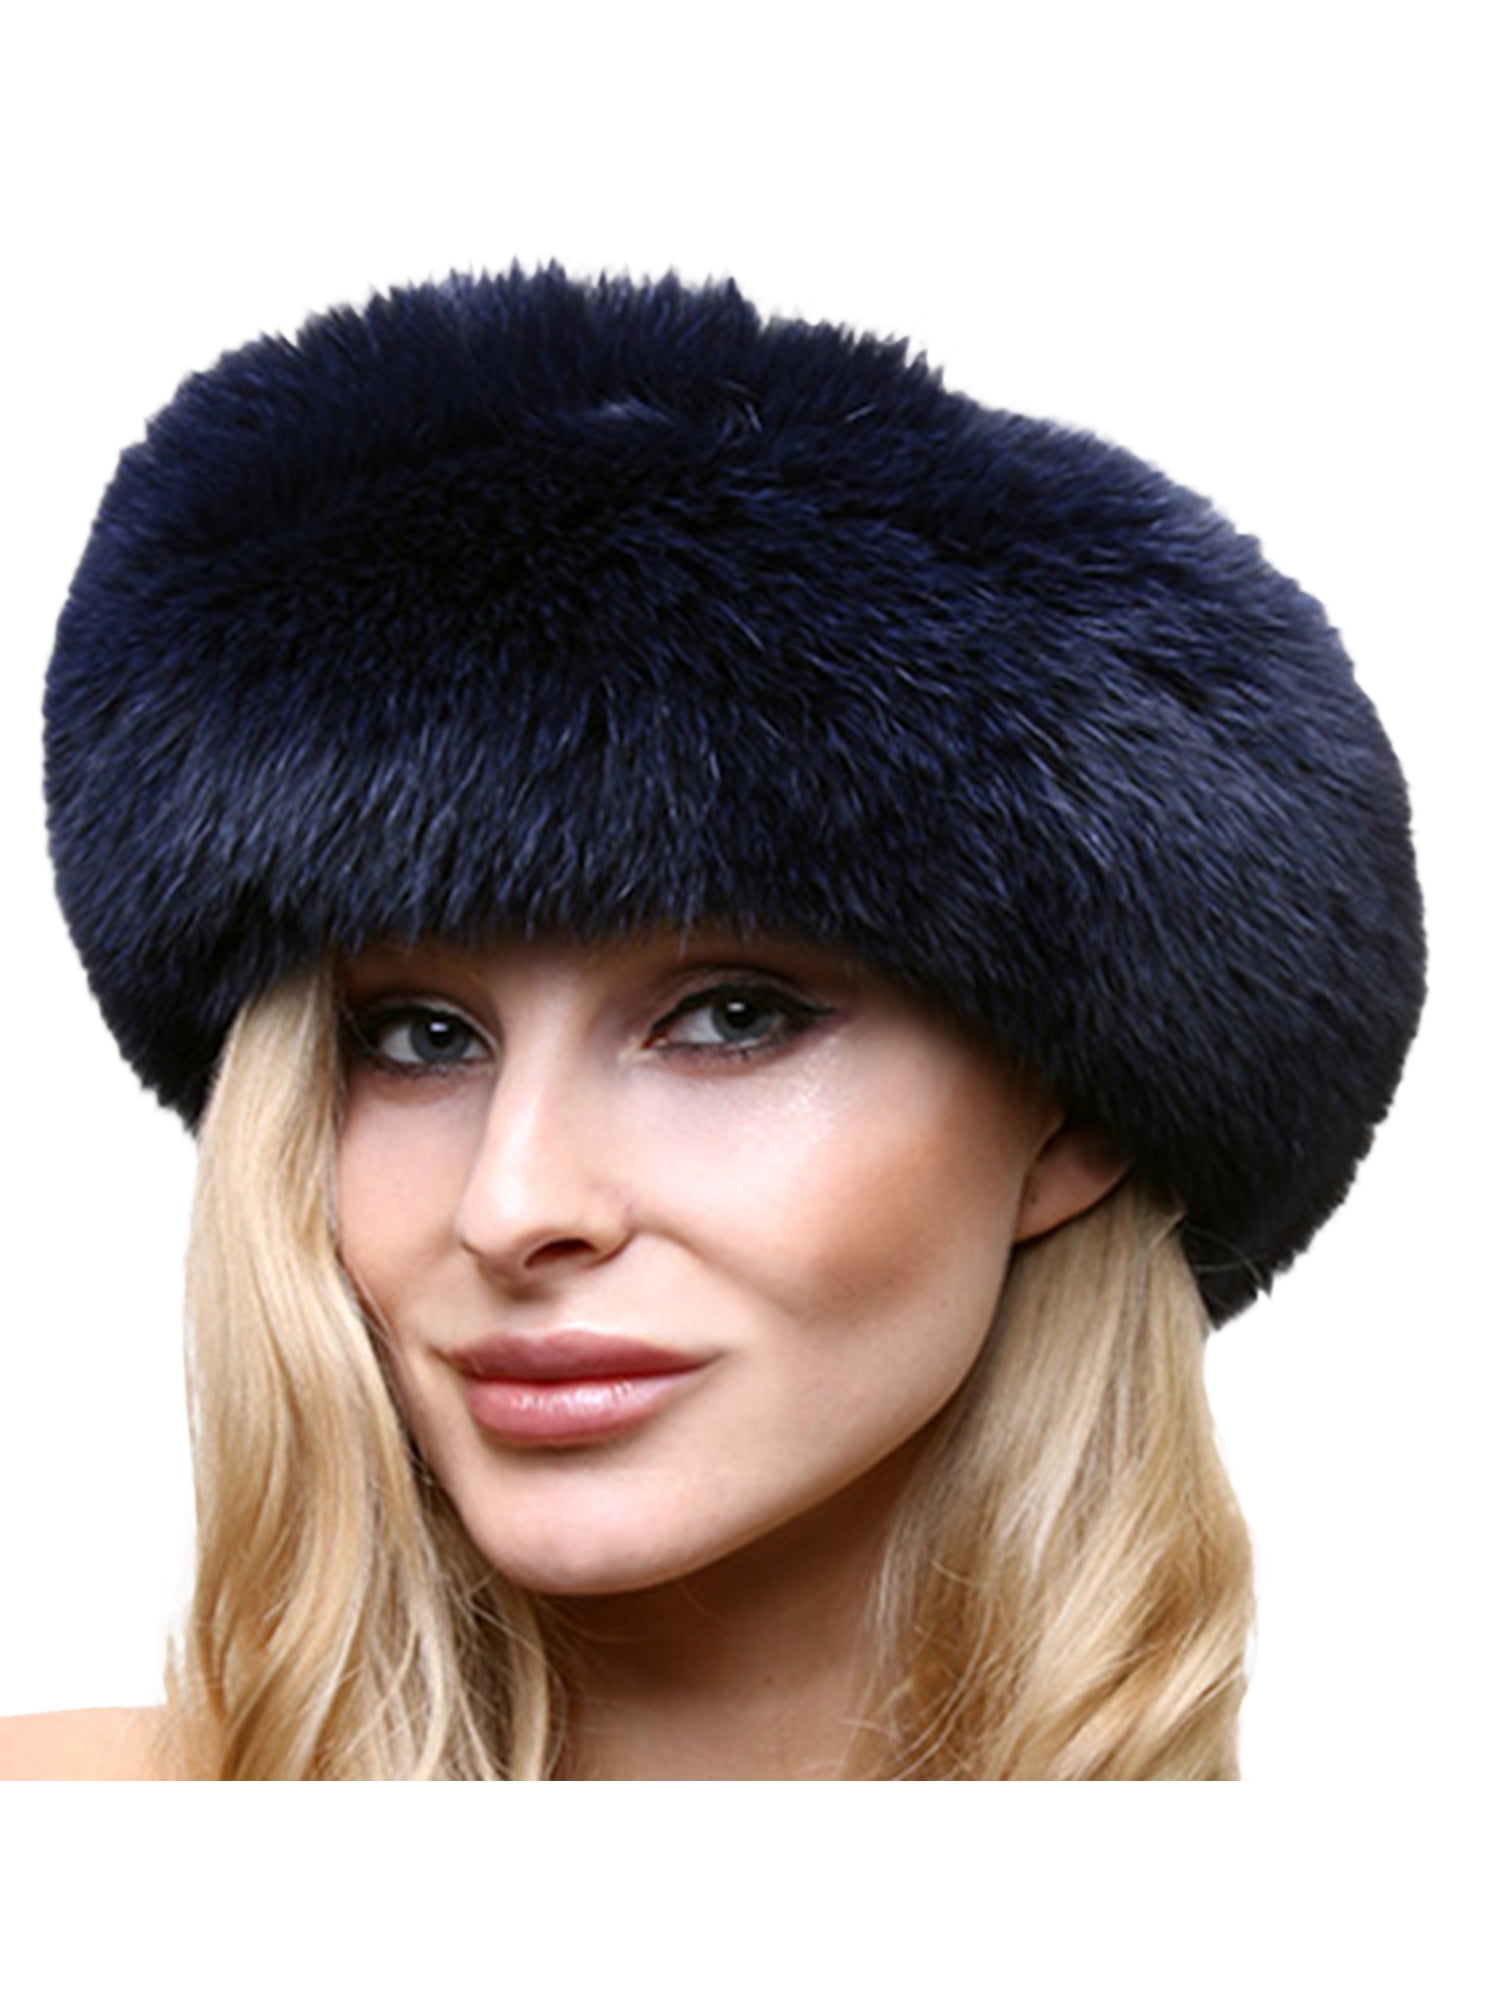 warm hat ushanka hat Women's fur accessory Βlack real fox fur Russian hat for winter Luxury gift for her. Accessories Hats & Caps Winter Hats Handmade fluffy Cossack hat 